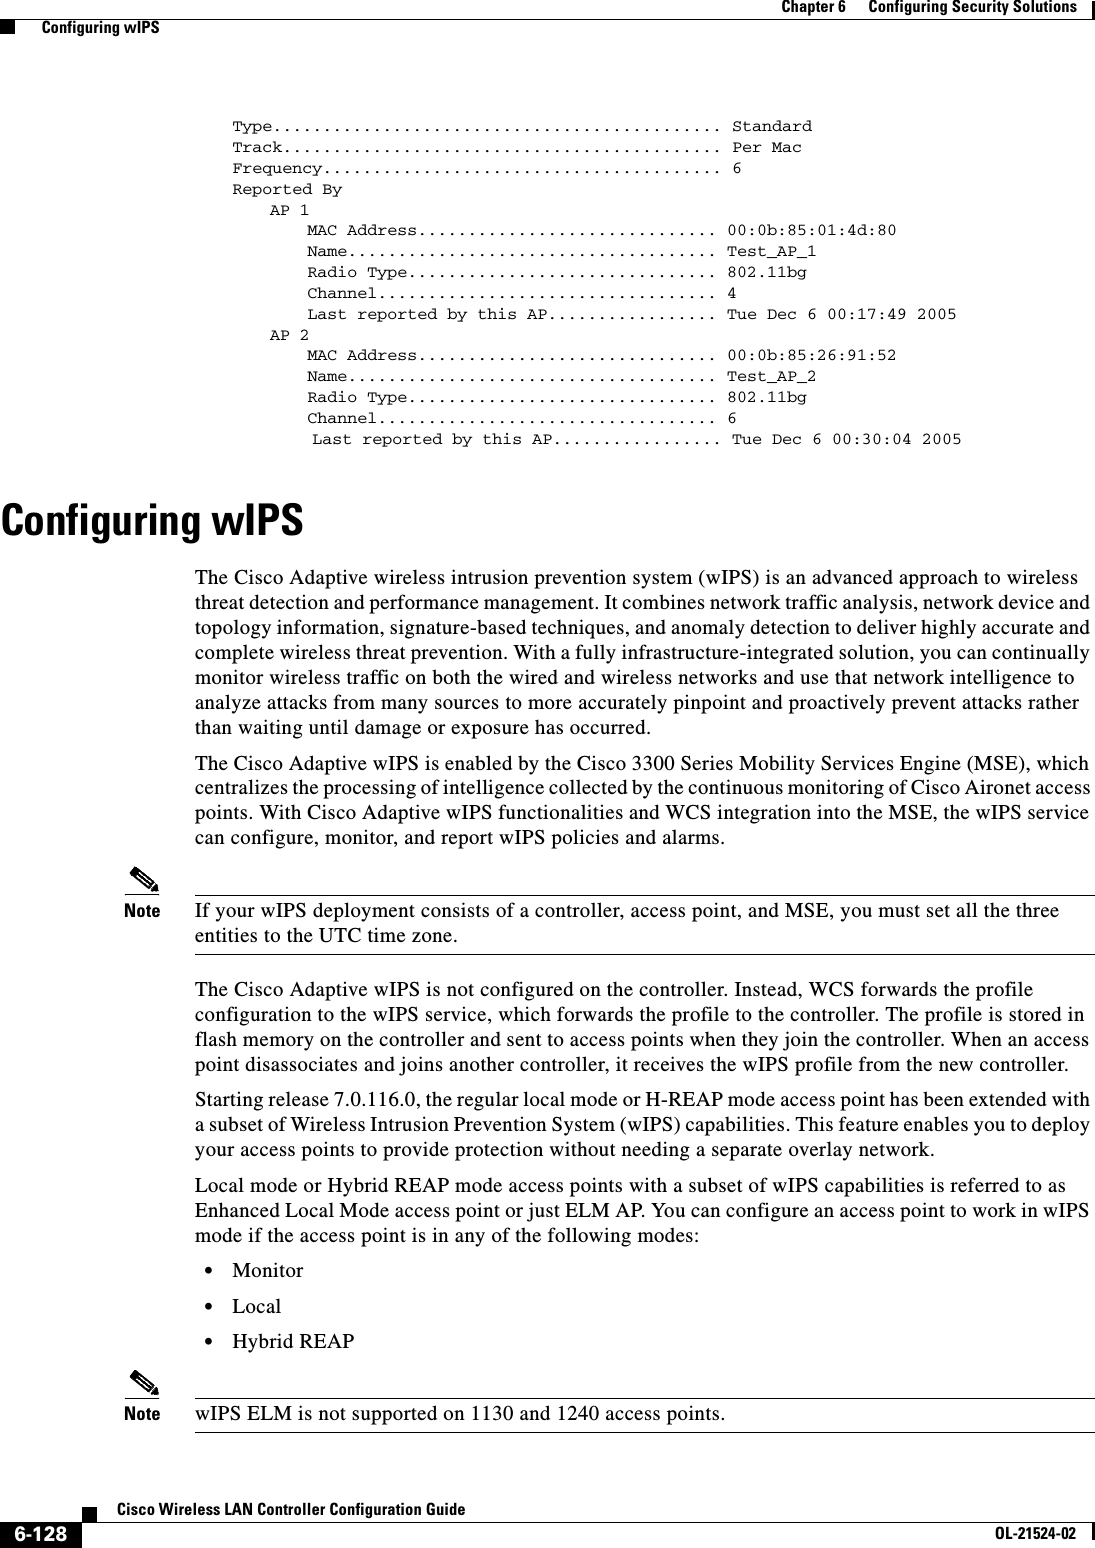  6-128Cisco Wireless LAN Controller Configuration GuideOL-21524-02Chapter 6      Configuring Security Solutions  Configuring wIPSType............................................. StandardTrack............................................ Per MacFrequency........................................ 6Reported ByAP 1MAC Address.............................. 00:0b:85:01:4d:80Name..................................... Test_AP_1Radio Type............................... 802.11bgChannel.................................. 4Last reported by this AP................. Tue Dec 6 00:17:49 2005AP 2MAC Address.............................. 00:0b:85:26:91:52Name..................................... Test_AP_2Radio Type............................... 802.11bgChannel.................................. 6        Last reported by this AP................. Tue Dec 6 00:30:04 2005Configuring wIPSThe Cisco Adaptive wireless intrusion prevention system (wIPS) is an advanced approach to wireless threat detection and performance management. It combines network traffic analysis, network device and topology information, signature-based techniques, and anomaly detection to deliver highly accurate and complete wireless threat prevention. With a fully infrastructure-integrated solution, you can continually monitor wireless traffic on both the wired and wireless networks and use that network intelligence to analyze attacks from many sources to more accurately pinpoint and proactively prevent attacks rather than waiting until damage or exposure has occurred.The Cisco Adaptive wIPS is enabled by the Cisco 3300 Series Mobility Services Engine (MSE), which centralizes the processing of intelligence collected by the continuous monitoring of Cisco Aironet access points. With Cisco Adaptive wIPS functionalities and WCS integration into the MSE, the wIPS service can configure, monitor, and report wIPS policies and alarms.Note If your wIPS deployment consists of a controller, access point, and MSE, you must set all the three entities to the UTC time zone.The Cisco Adaptive wIPS is not configured on the controller. Instead, WCS forwards the profile configuration to the wIPS service, which forwards the profile to the controller. The profile is stored in flash memory on the controller and sent to access points when they join the controller. When an access point disassociates and joins another controller, it receives the wIPS profile from the new controller.Starting release 7.0.116.0, the regular local mode or H-REAP mode access point has been extended with a subset of Wireless Intrusion Prevention System (wIPS) capabilities. This feature enables you to deploy your access points to provide protection without needing a separate overlay network.Local mode or Hybrid REAP mode access points with a subset of wIPS capabilities is referred to as Enhanced Local Mode access point or just ELM AP. You can configure an access point to work in wIPS mode if the access point is in any of the following modes:  • Monitor  • Local  • Hybrid REAPNote wIPS ELM is not supported on 1130 and 1240 access points.